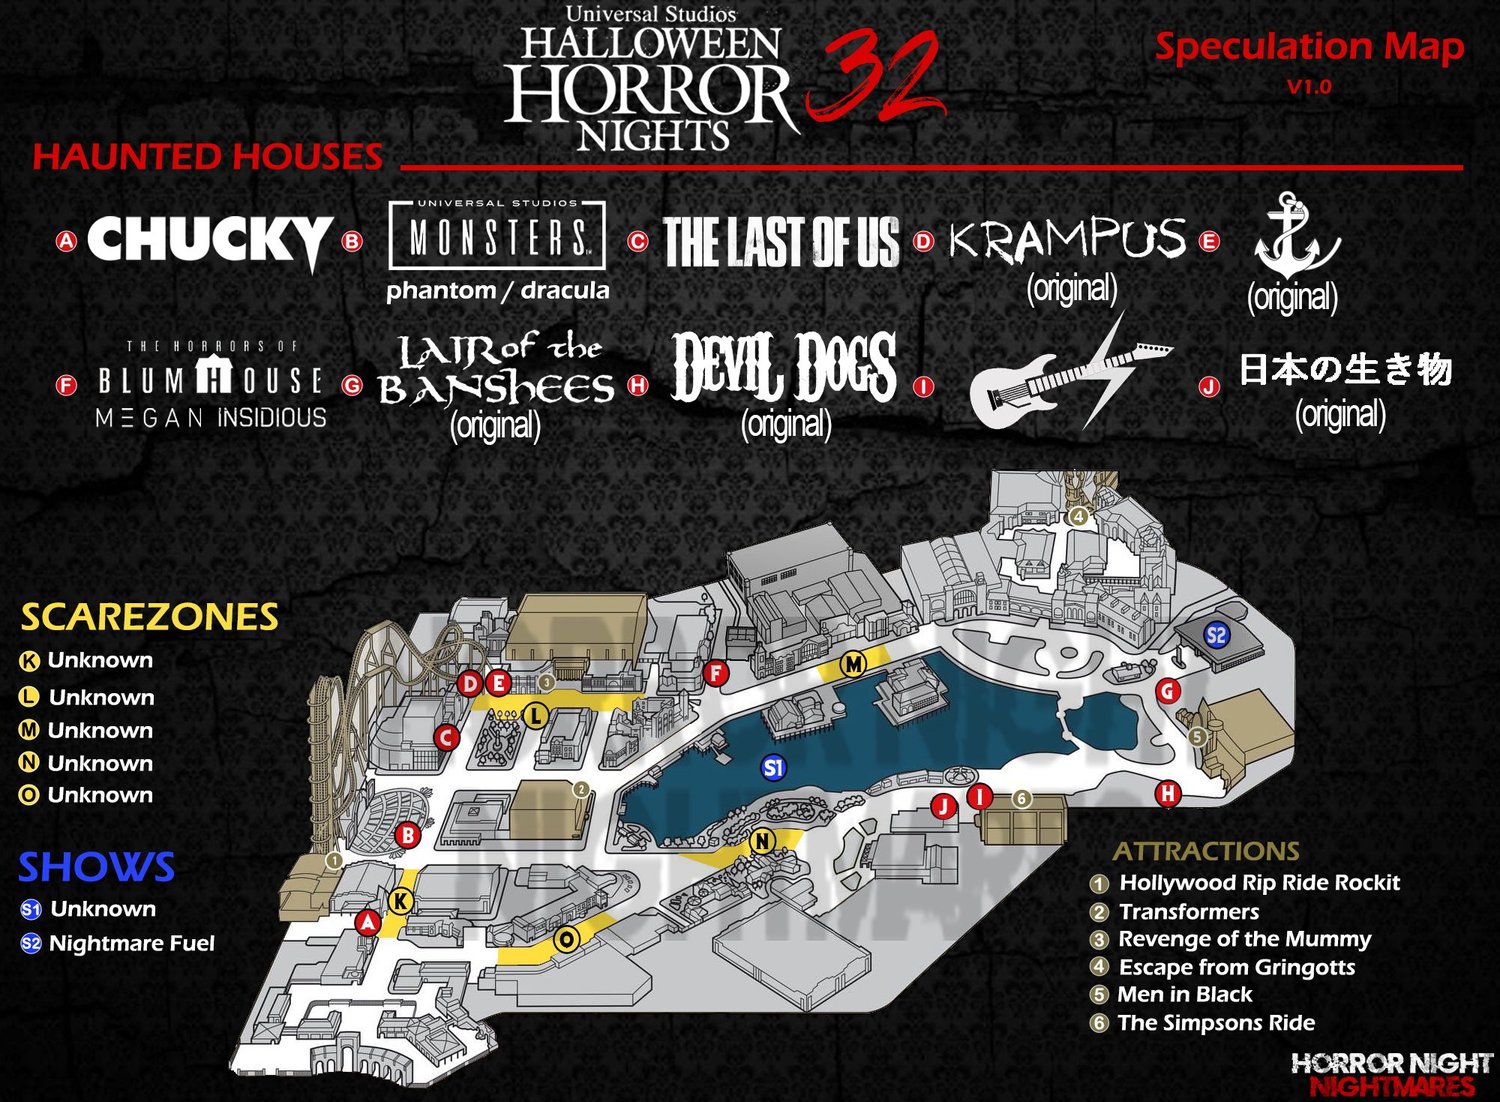 Halloween Horror Nights 2023 Speculation Map Arrives! | The Drop Network